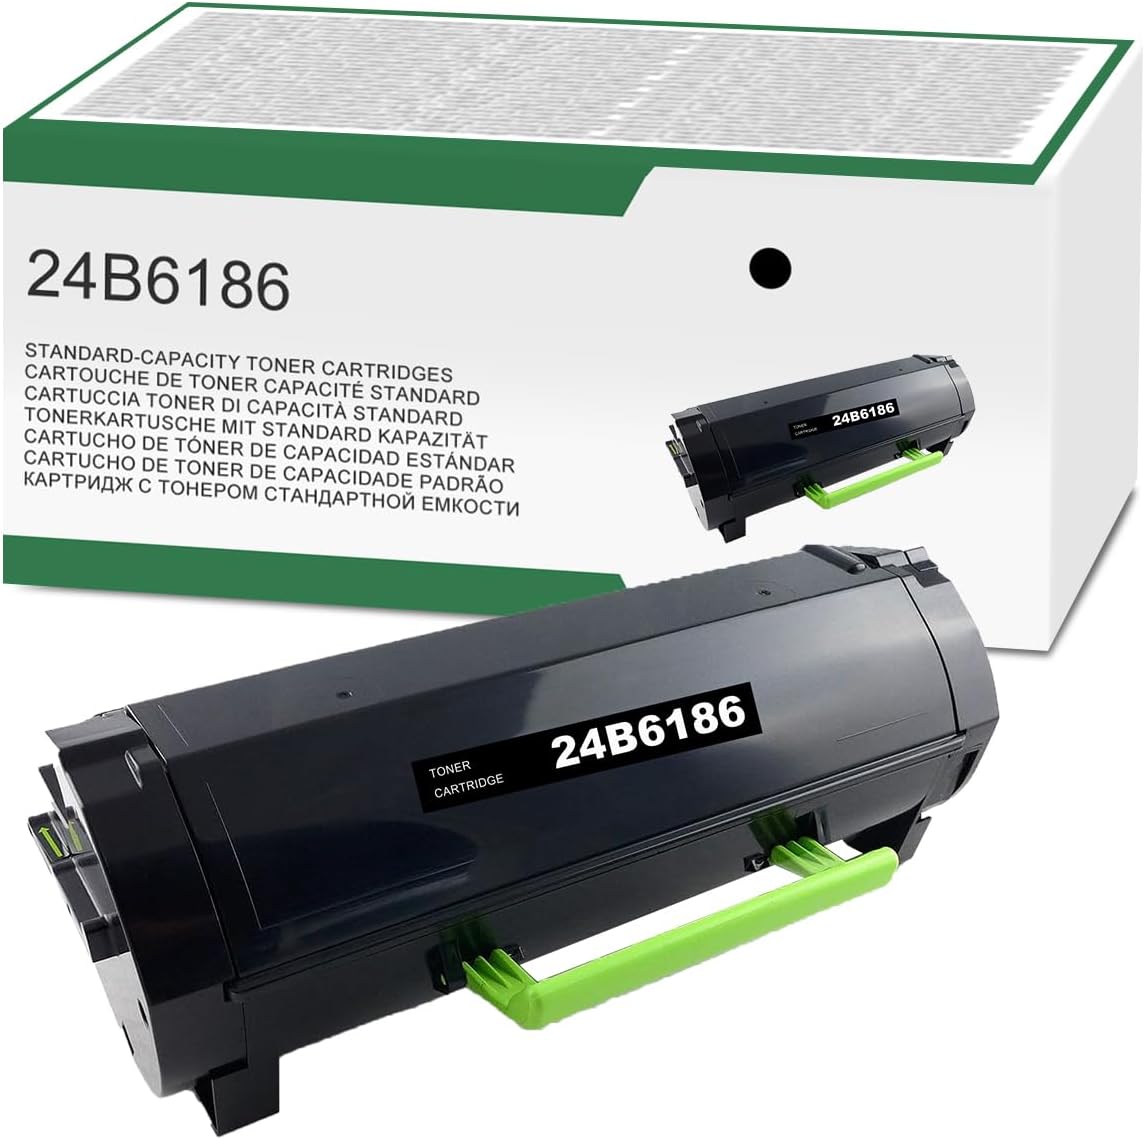 XM3150 24B6186 High Yield Black Toner Cartridge Replacement for Lexmark 24B6186 for M3150 XM3150 XM3150h Printer , 16,000 Pages